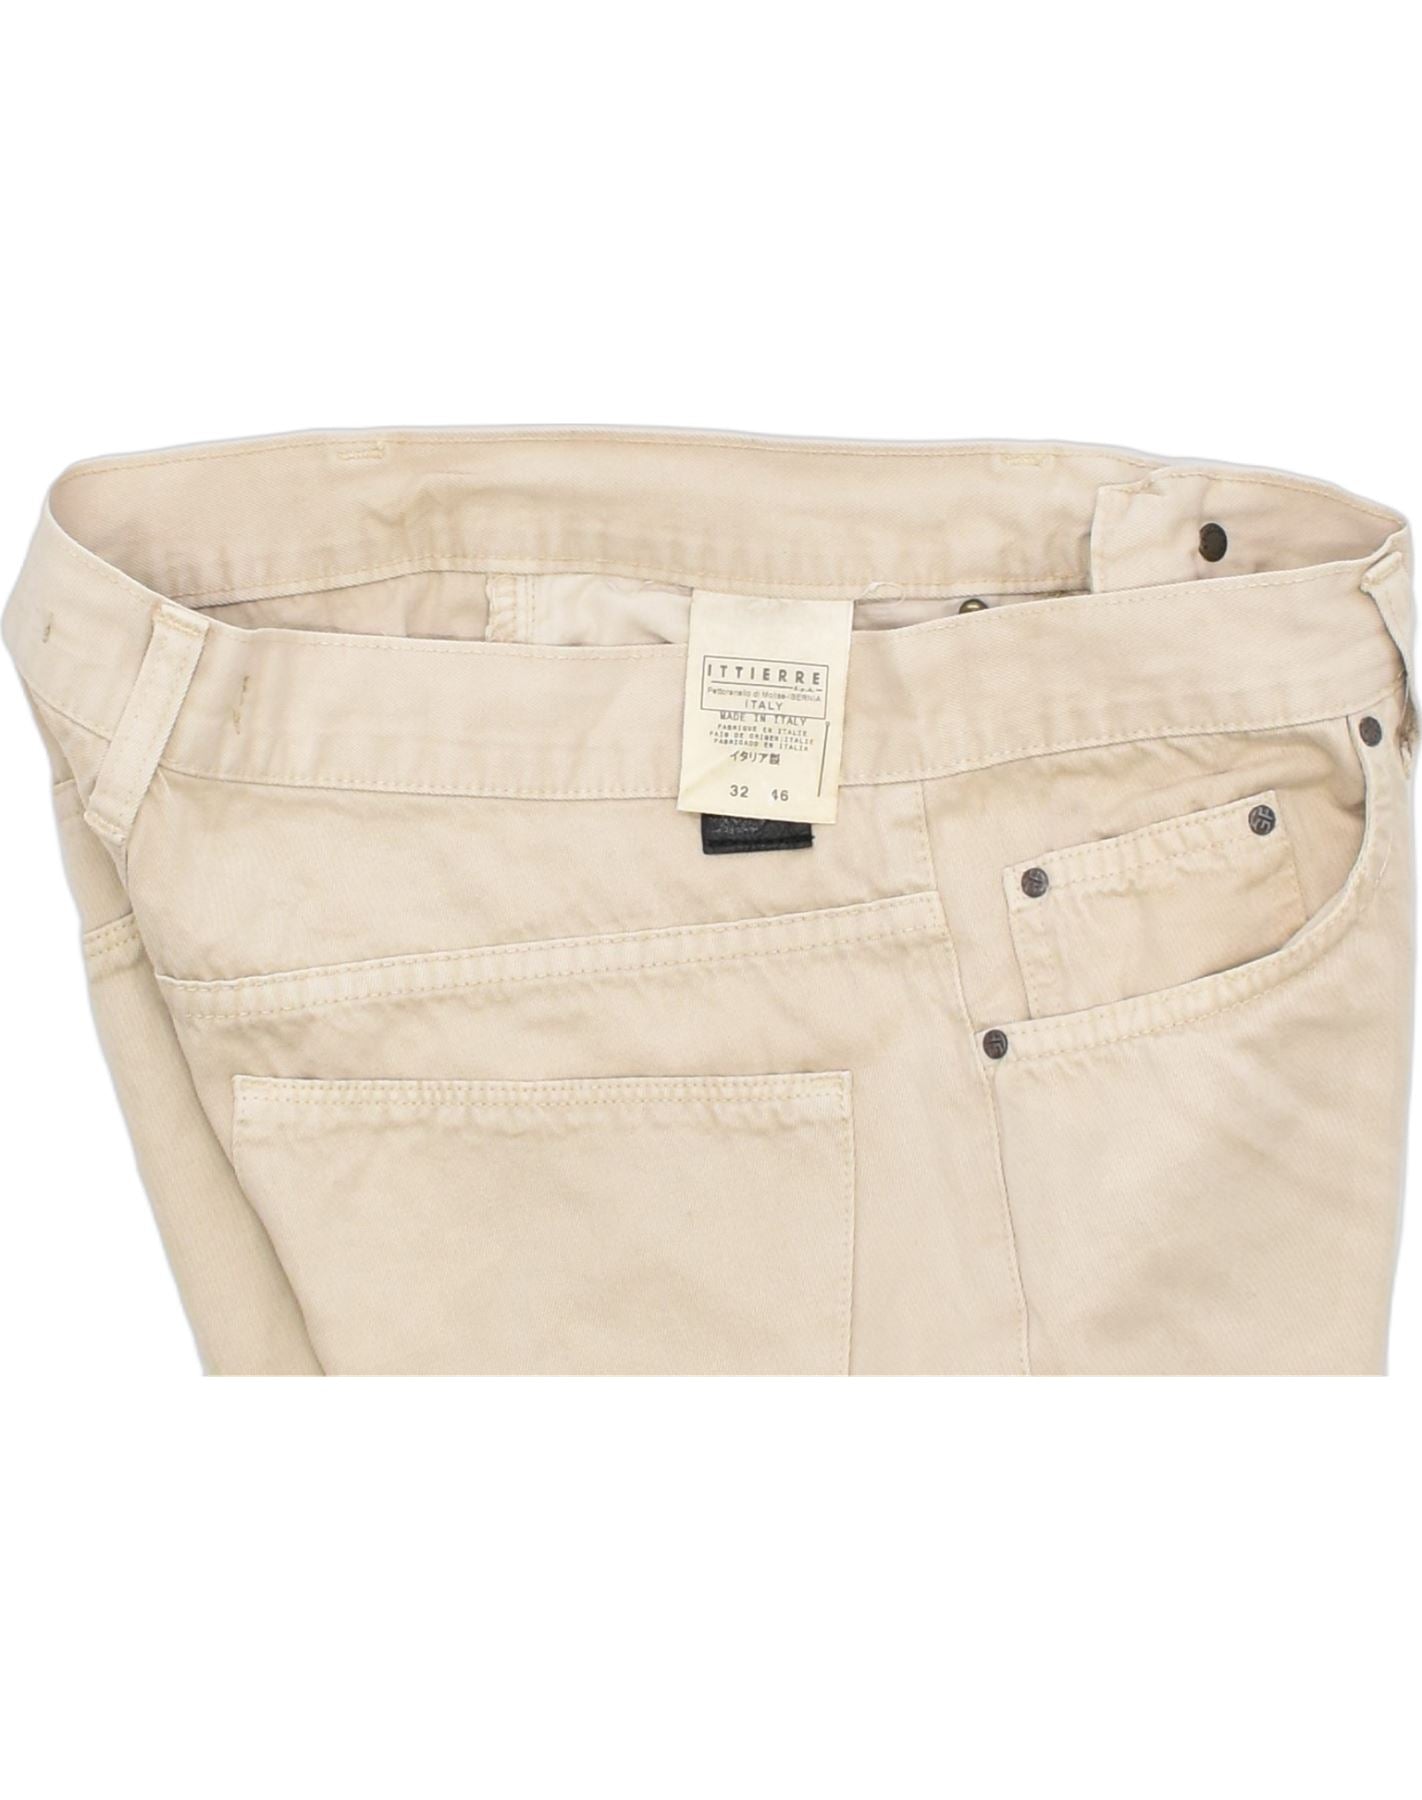 GIANFRANCO FERRE Mens Straight Casual Trousers W32 L28 Beige Cotton, Vintage & Second-Hand Clothing Online